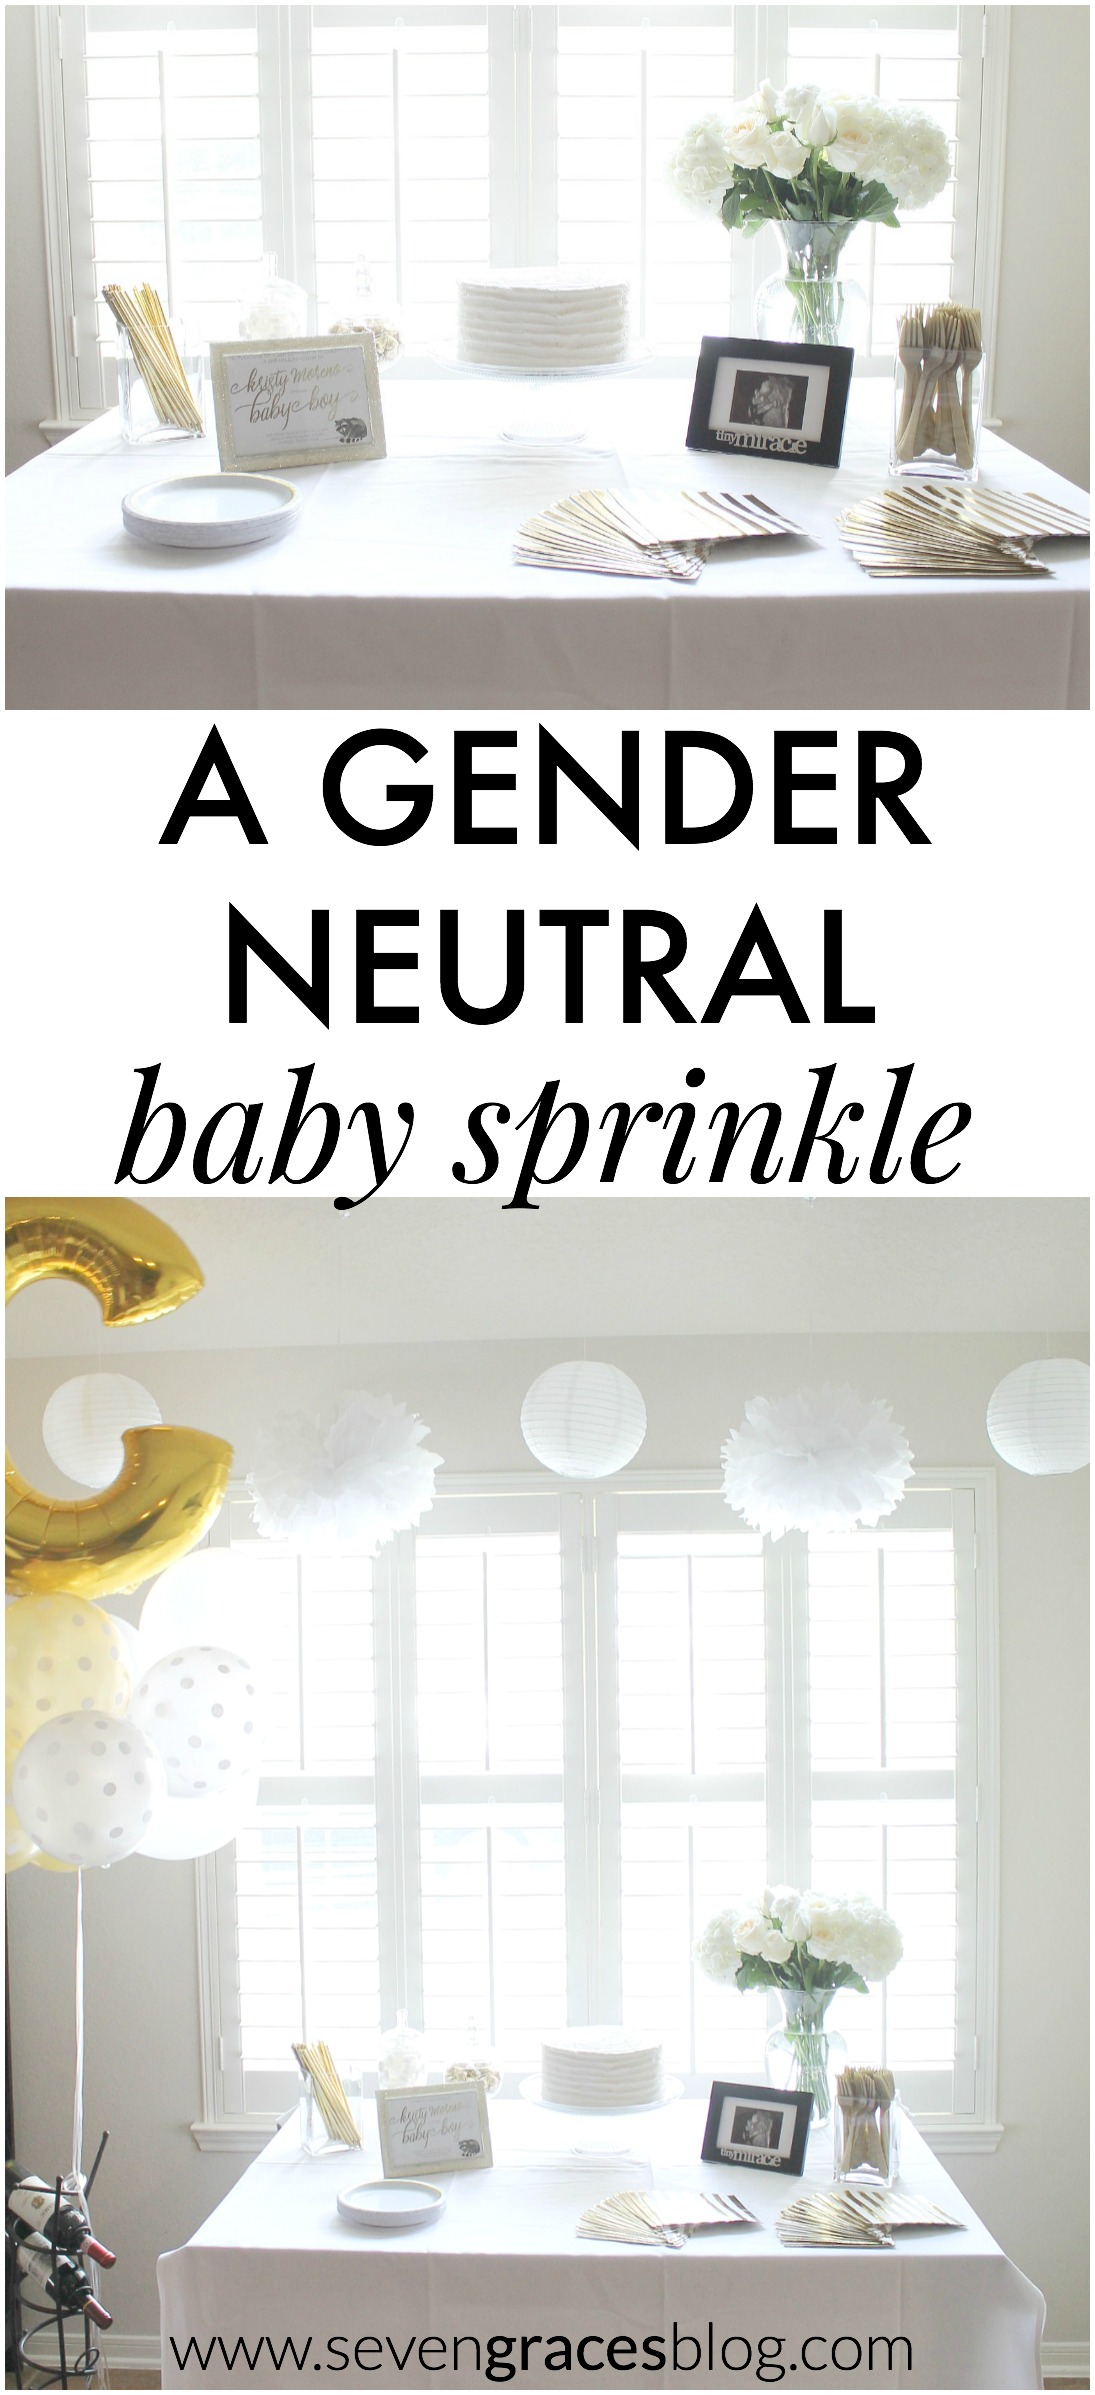 A gender neutral baby shower sprinkle. All the details from an elegant and simple shower in a color scheme of white, gray, and gold. Just beautiful!